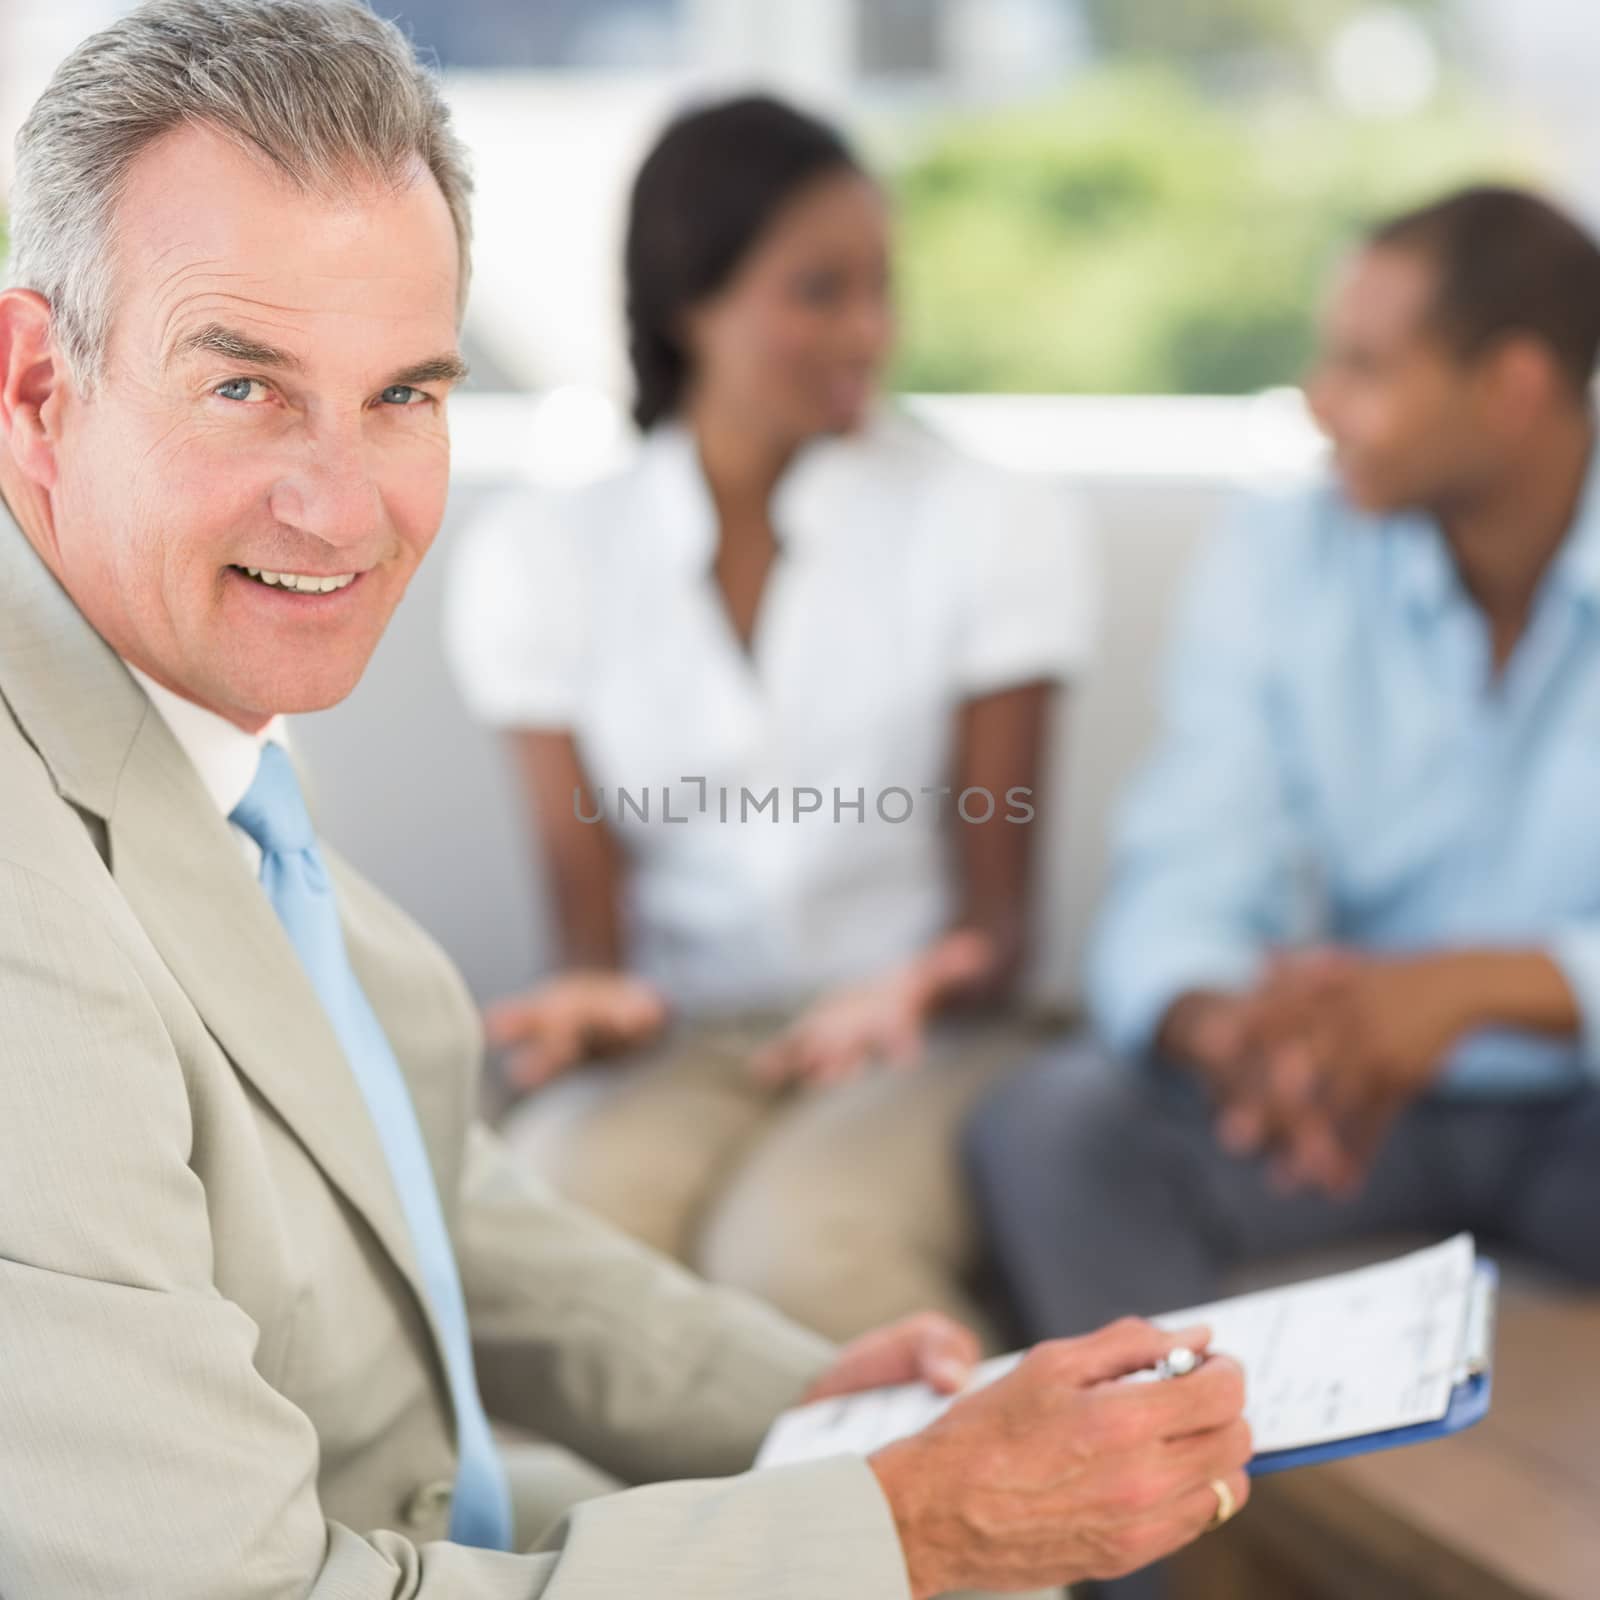 Salesman smiling at camera with couple behind him by Wavebreakmedia